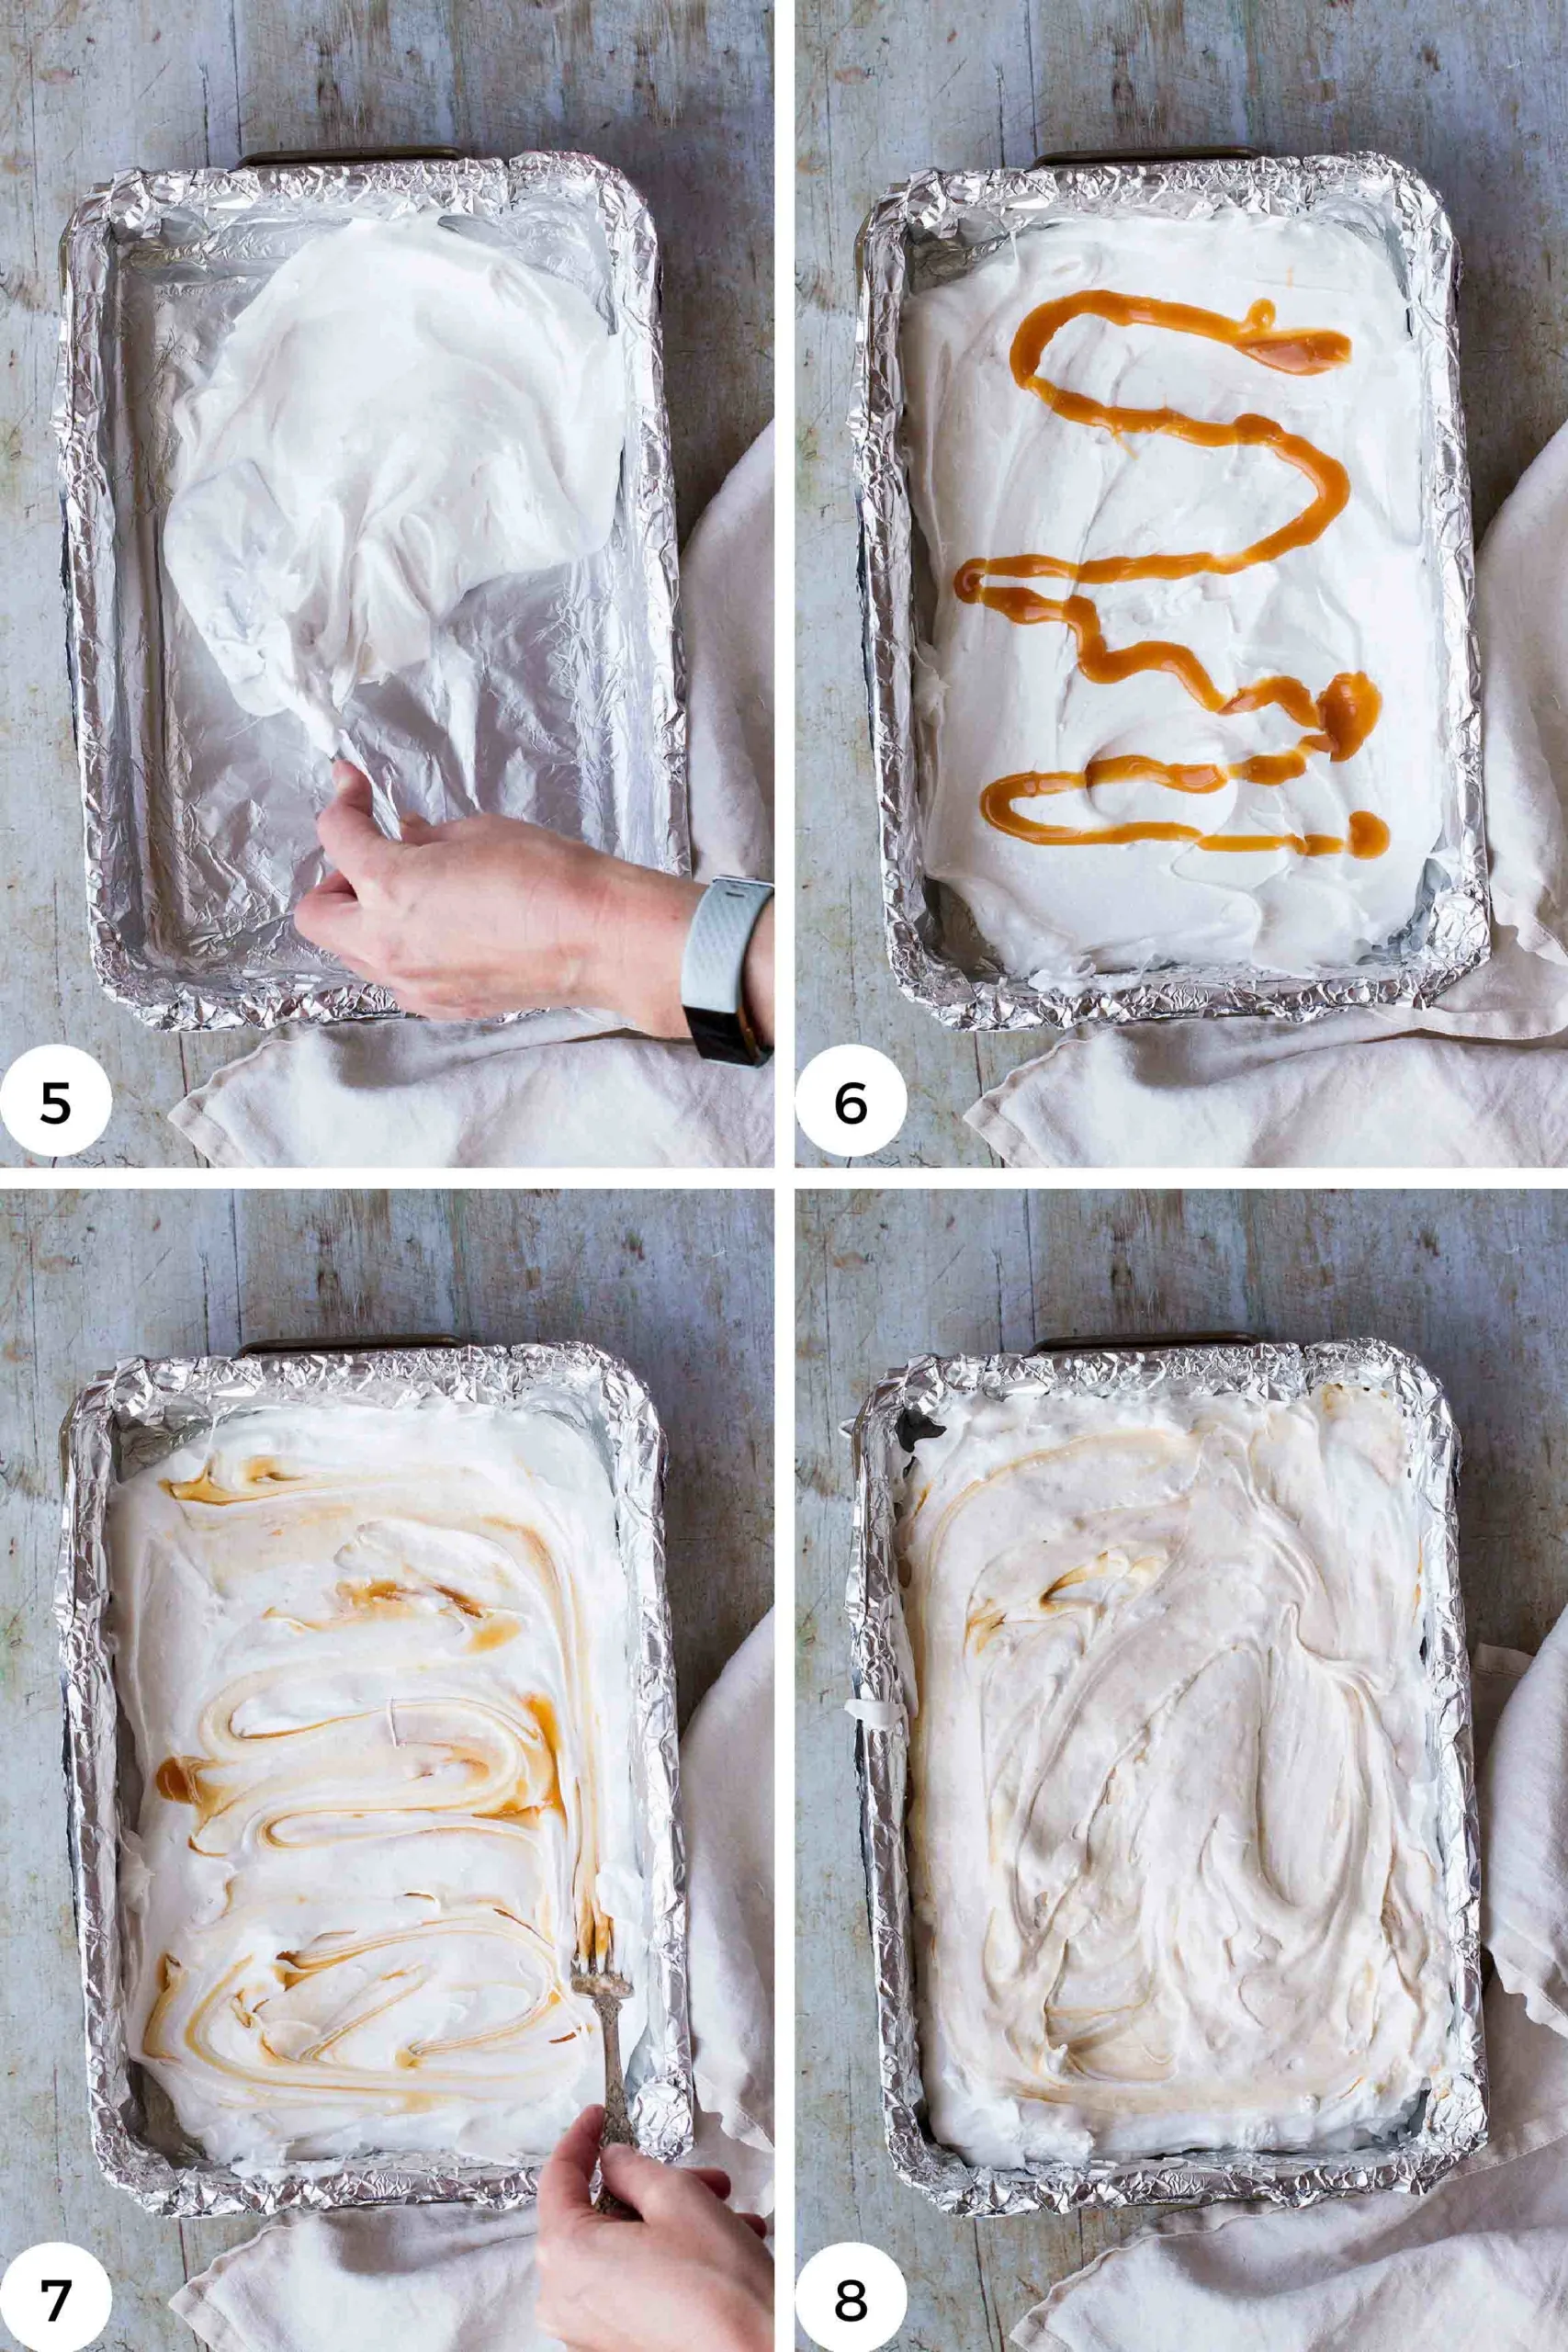 Steps to make the salted caramel ripples.